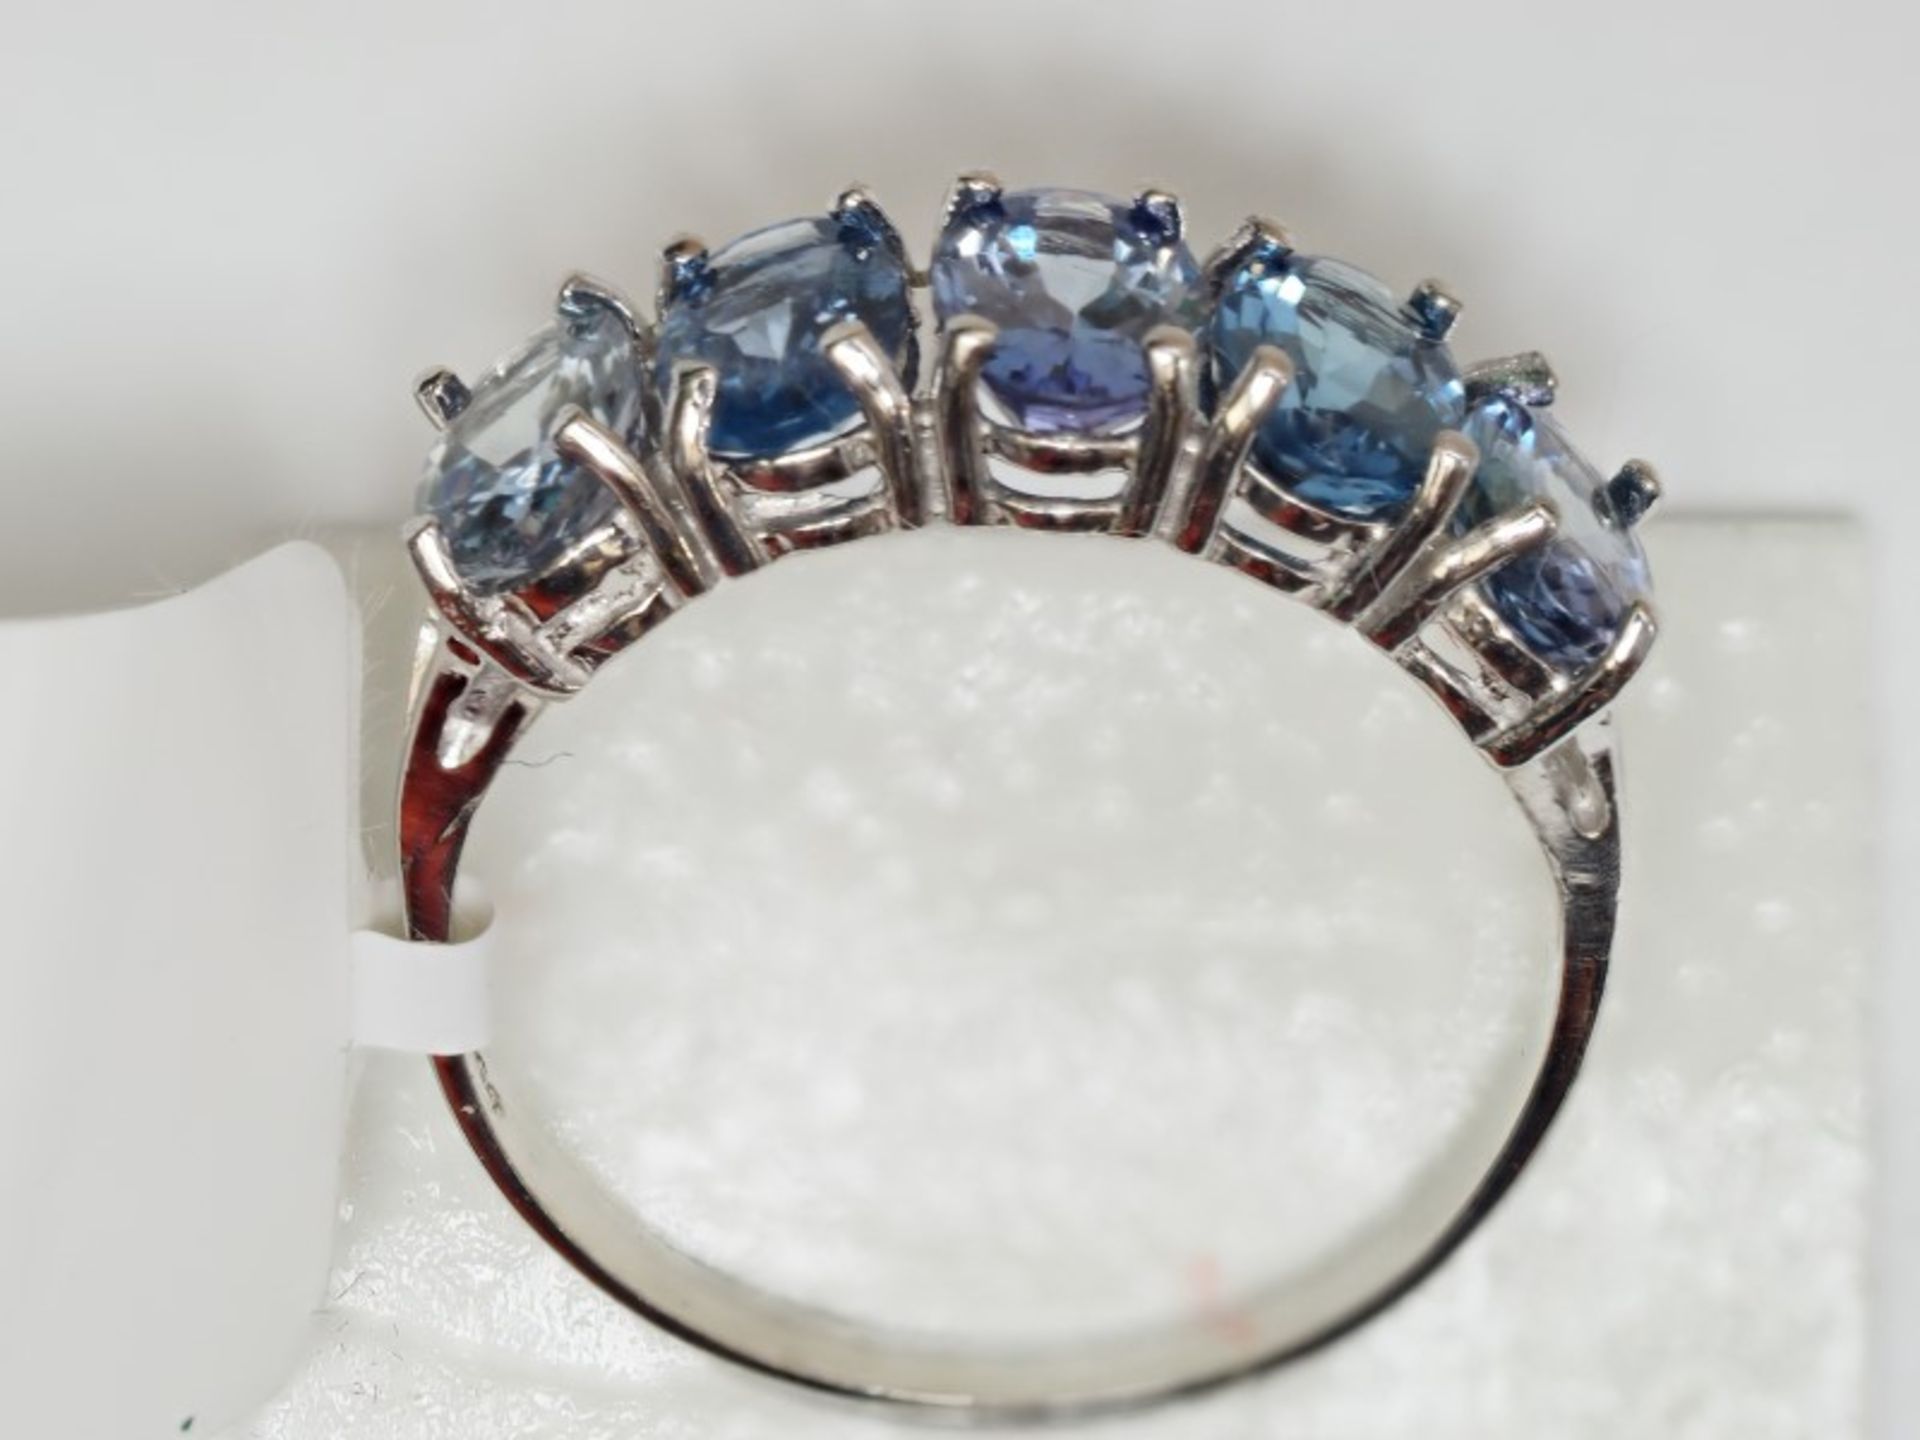 10kt White Gold Tanzanite (2.5ct) Ring Insurance Value $1500 - Image 3 of 4